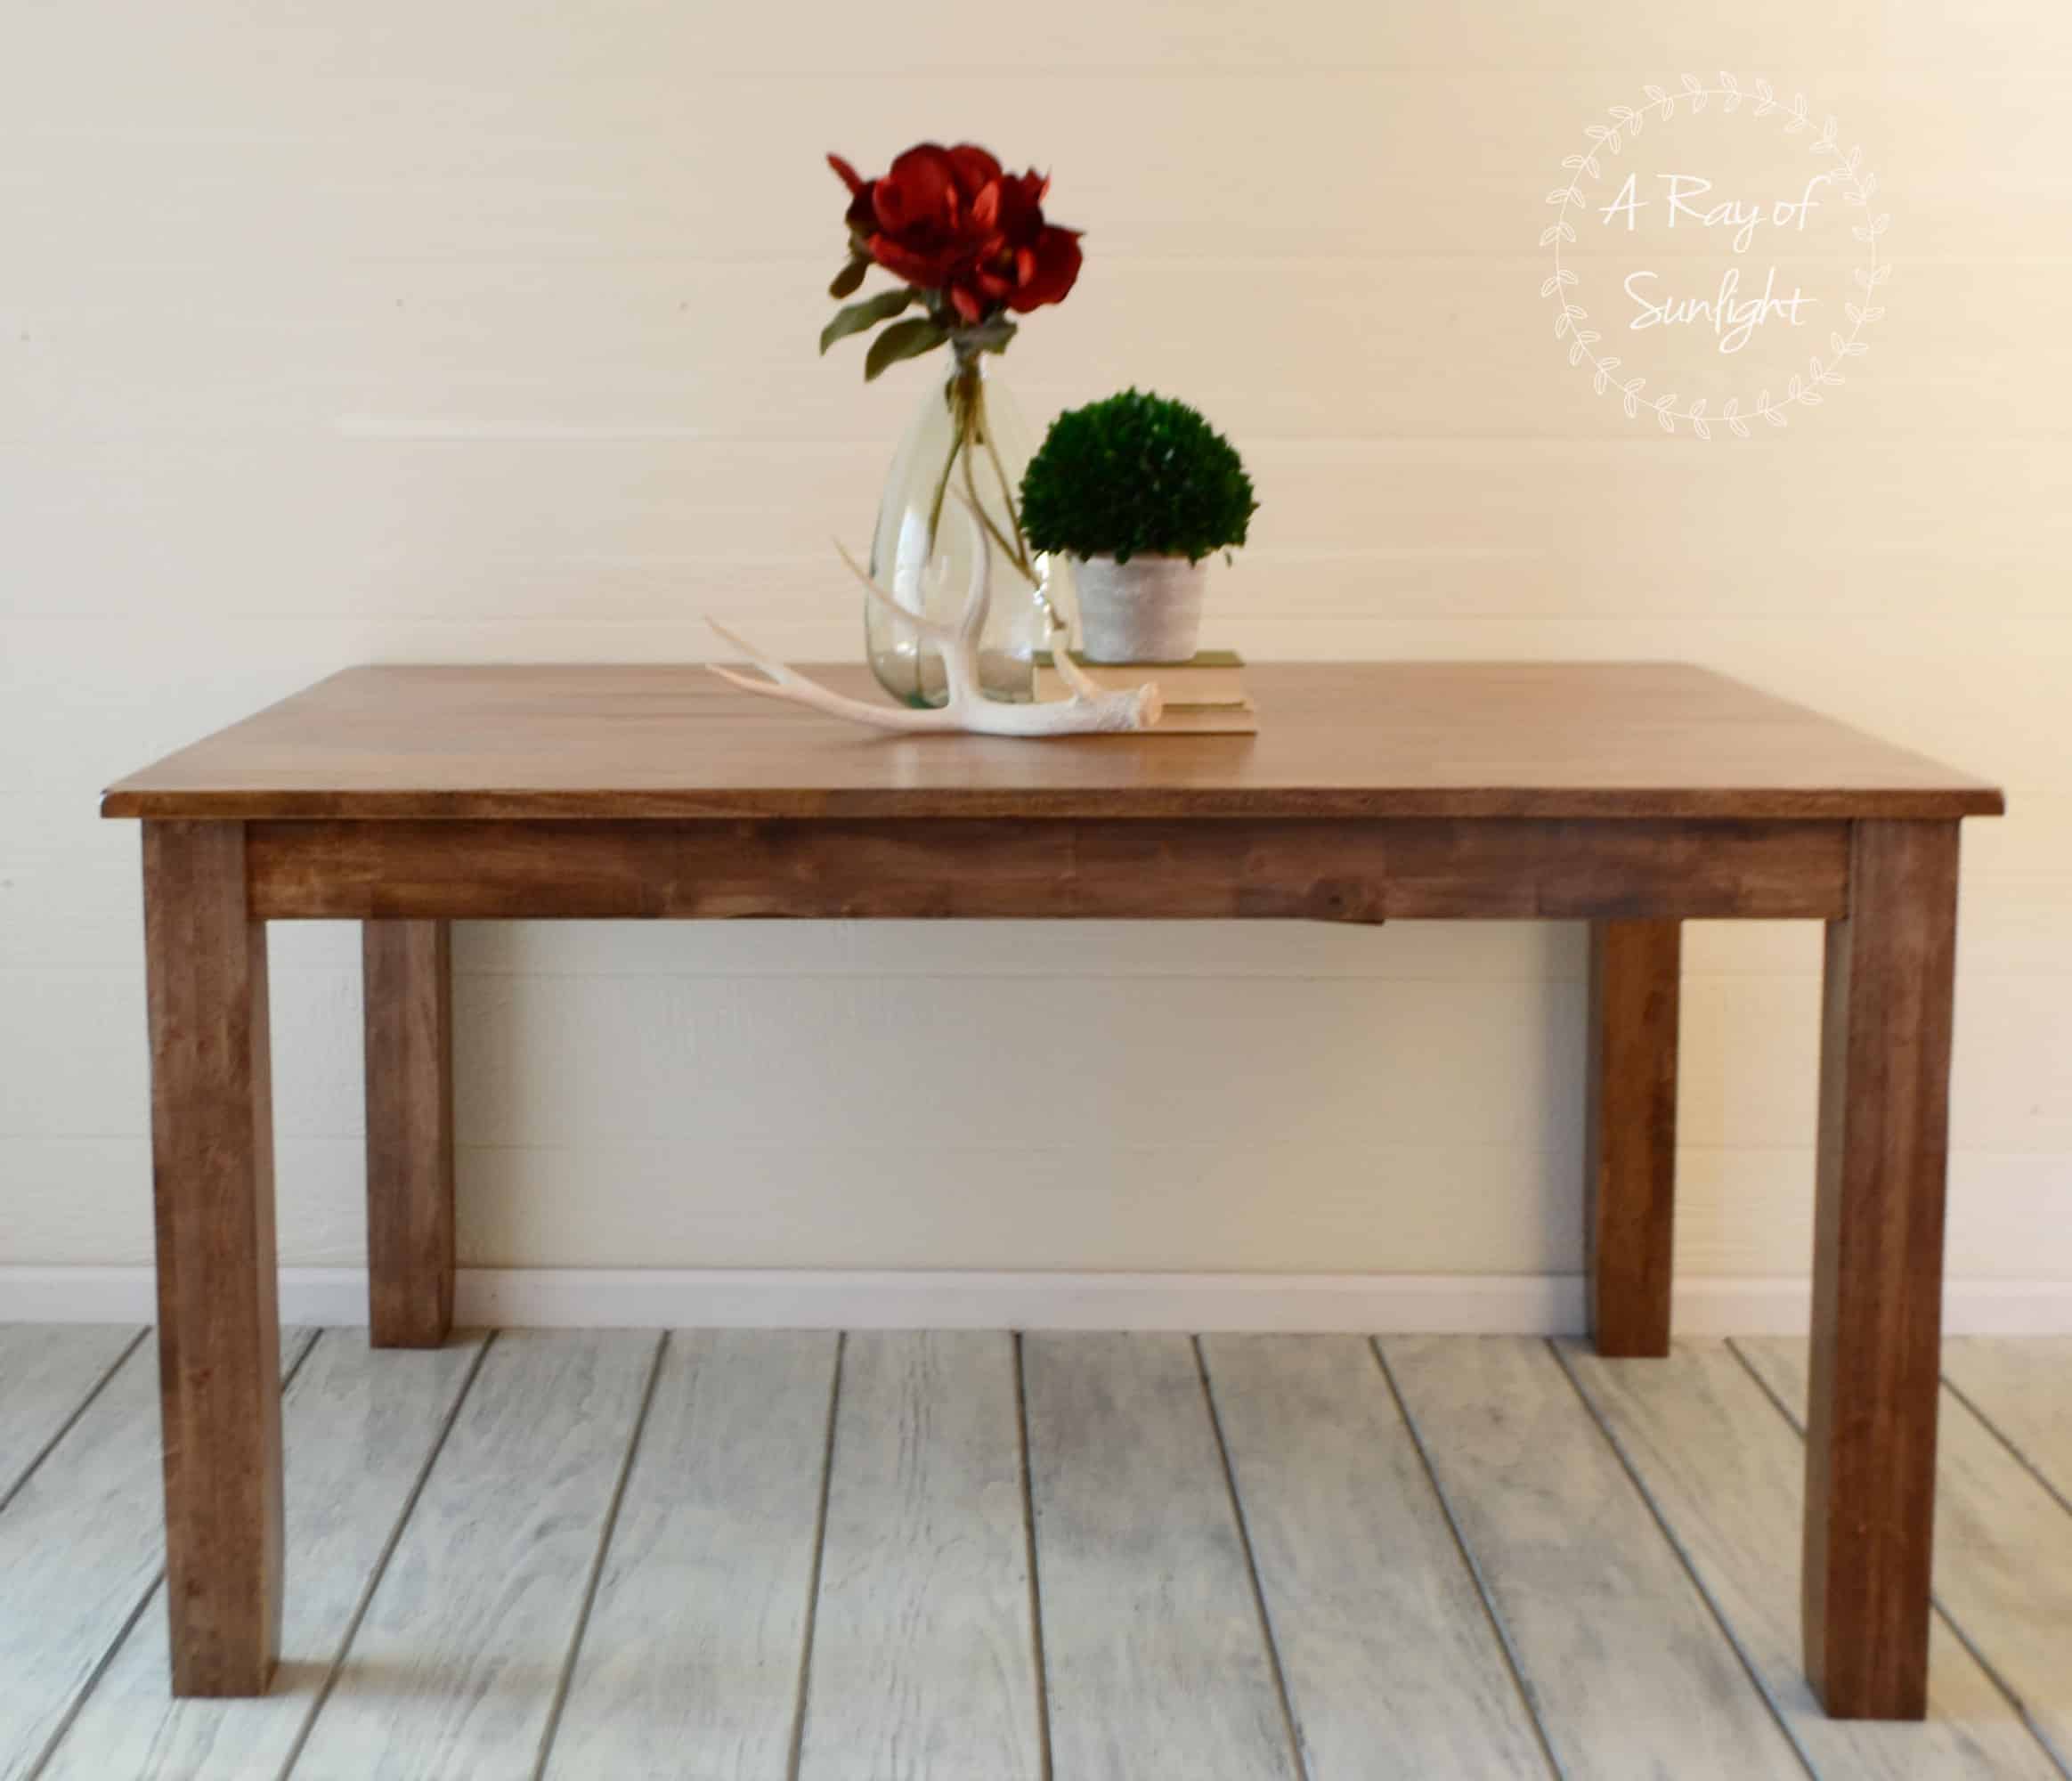 How to Strip a Kitchen Table